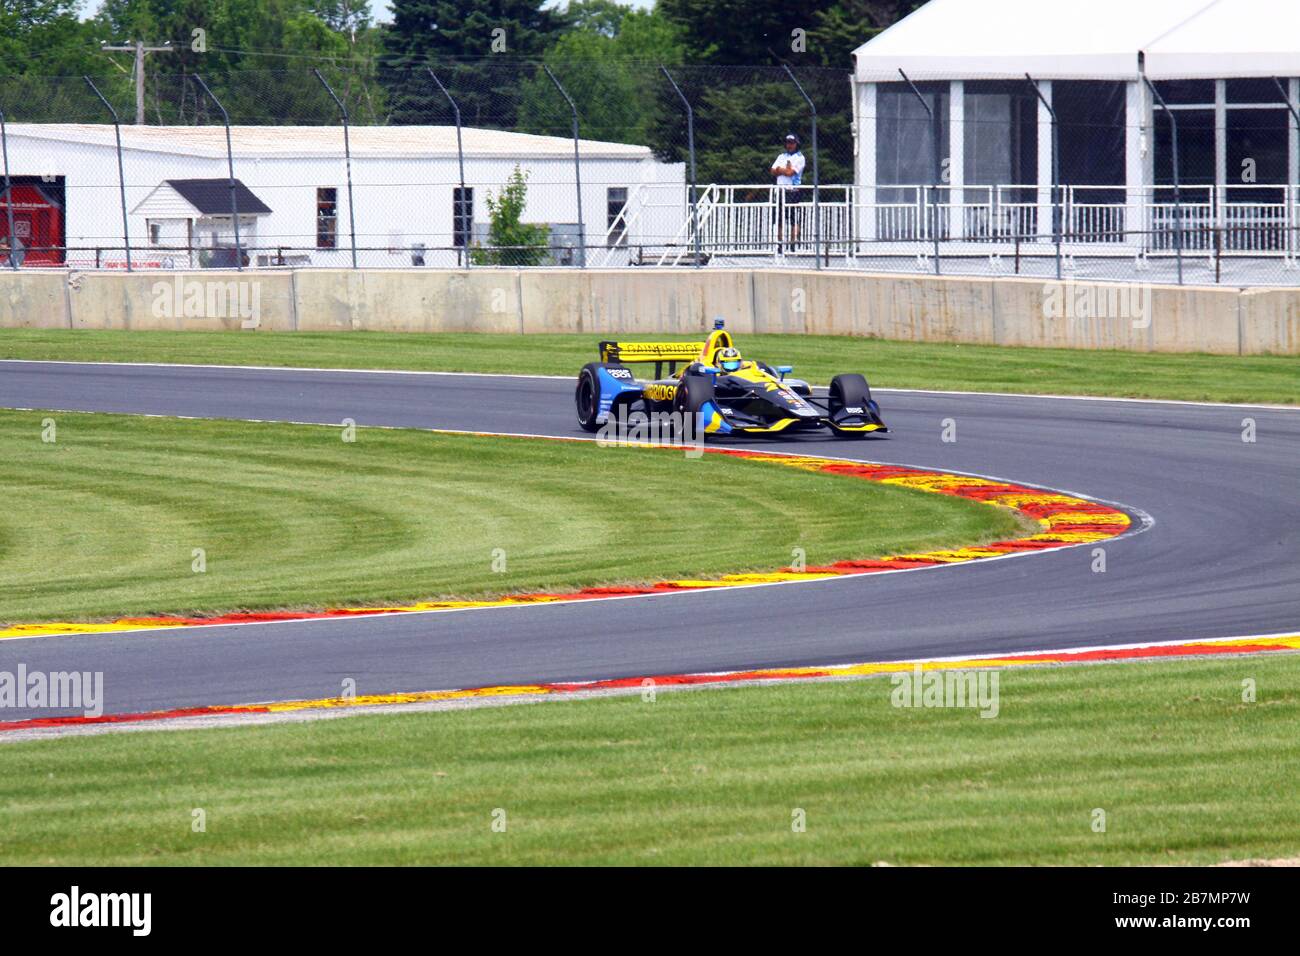 Elkhart Lake, Wisconsin - June 21, 2019: 26 Zach Veach, USA, Andretti Autosport, REV Group Grand Prix at Road America, on course for practice session. Stock Photo